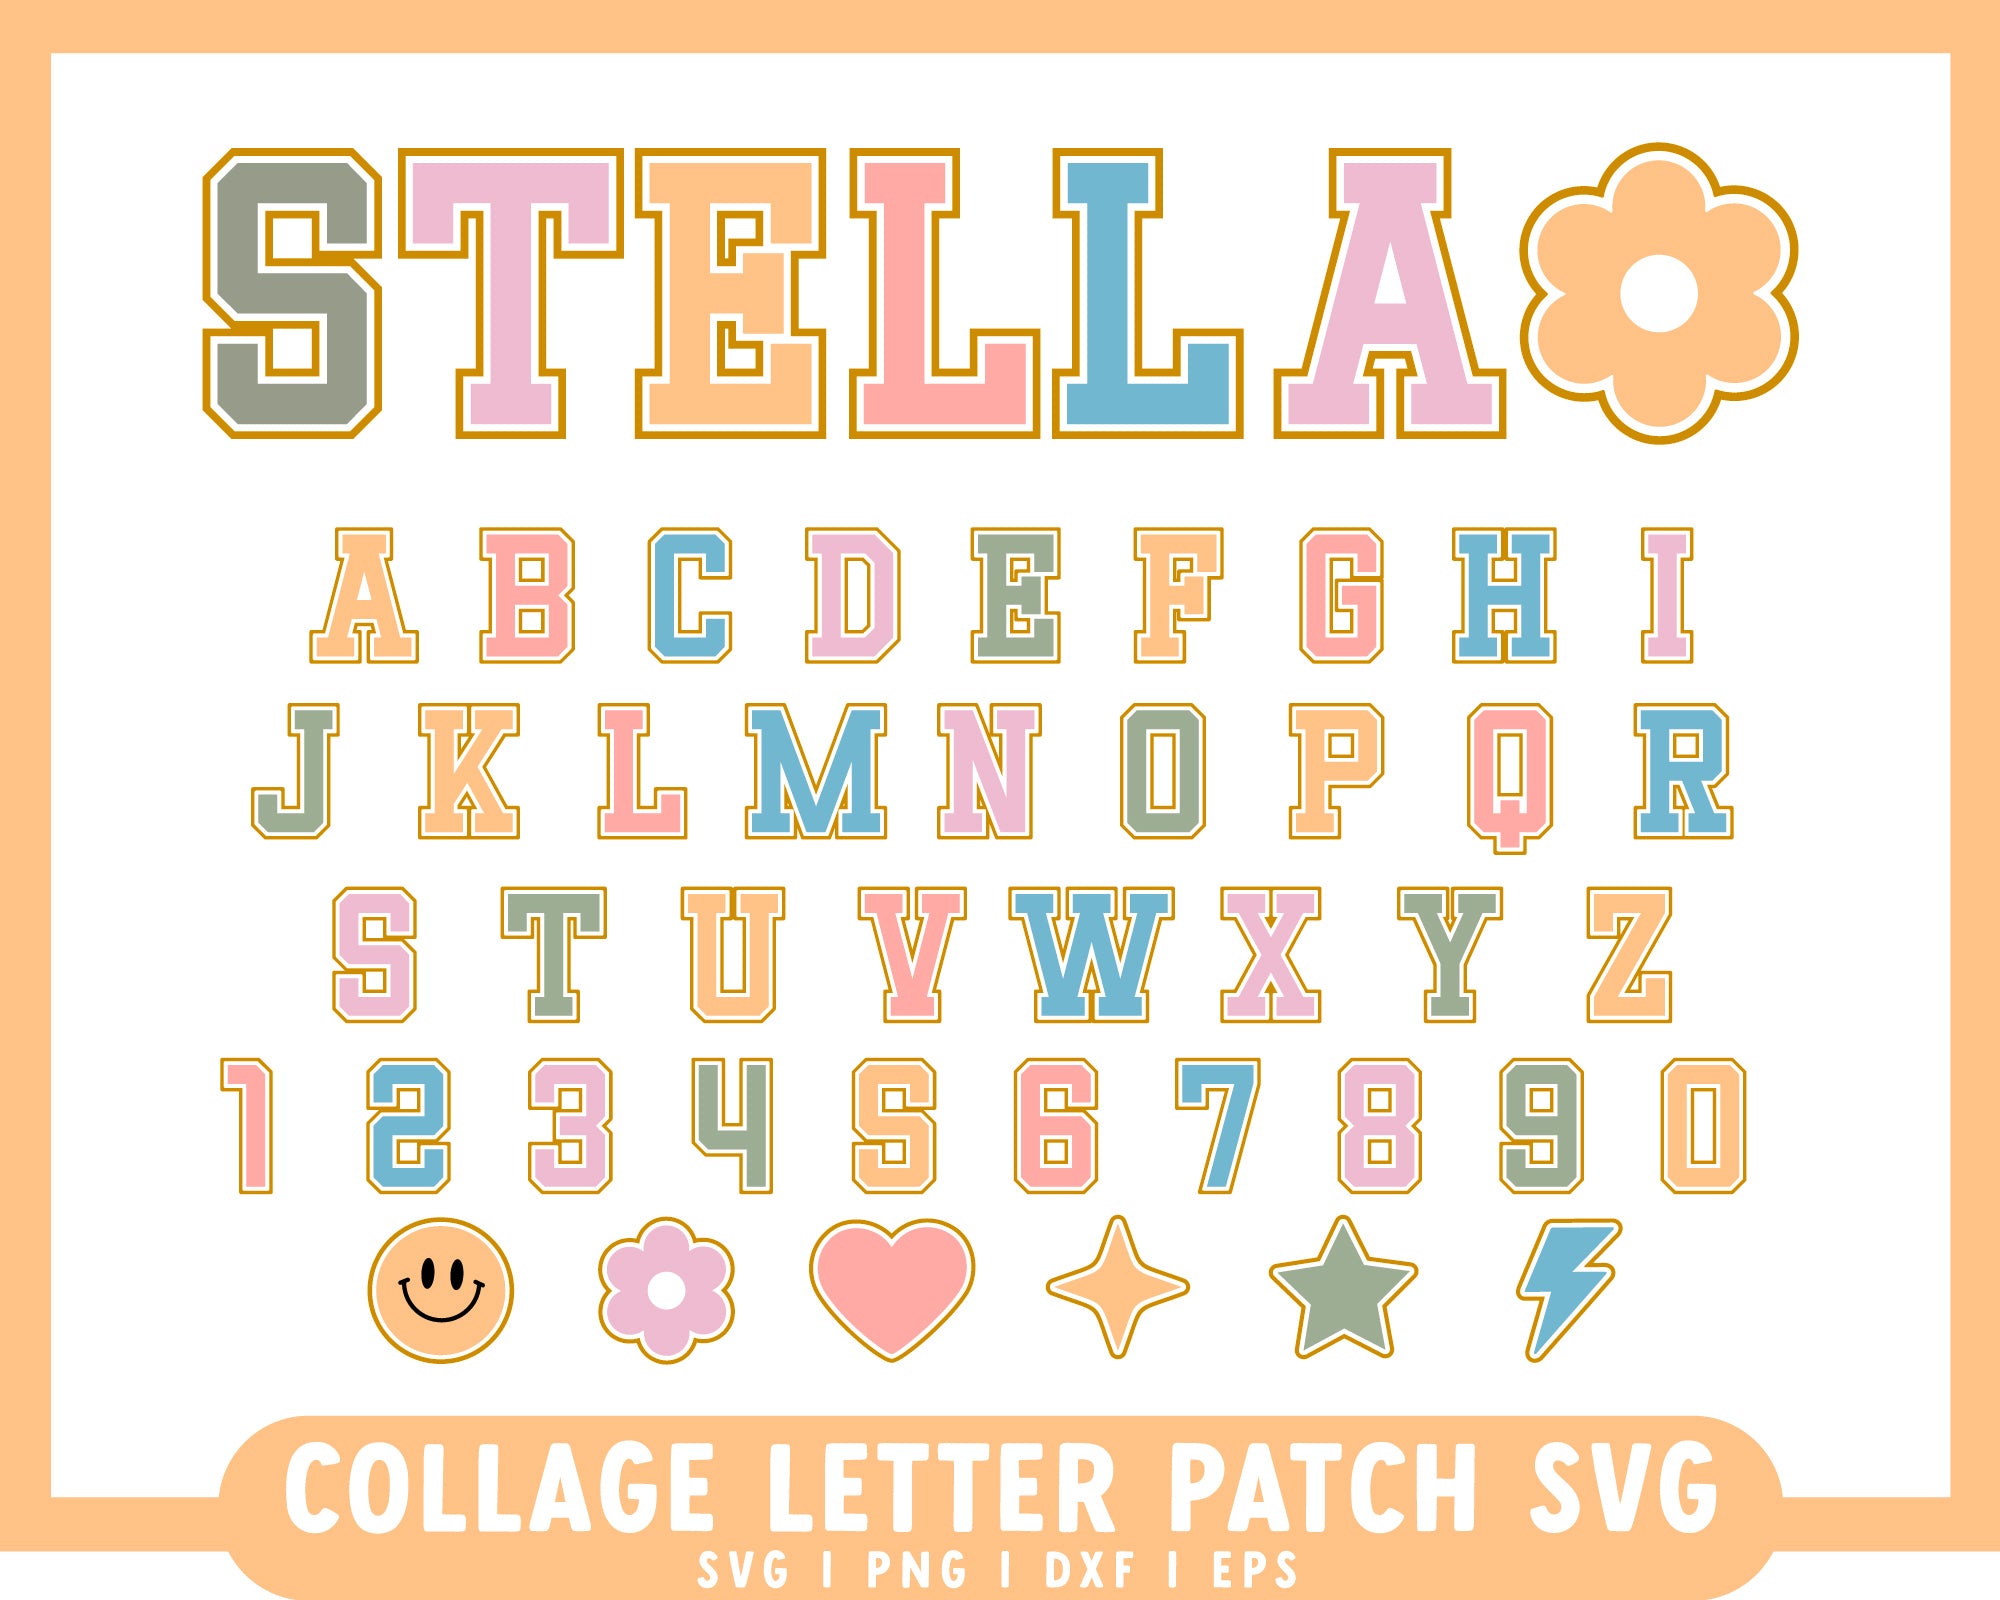 LETTER PATCH